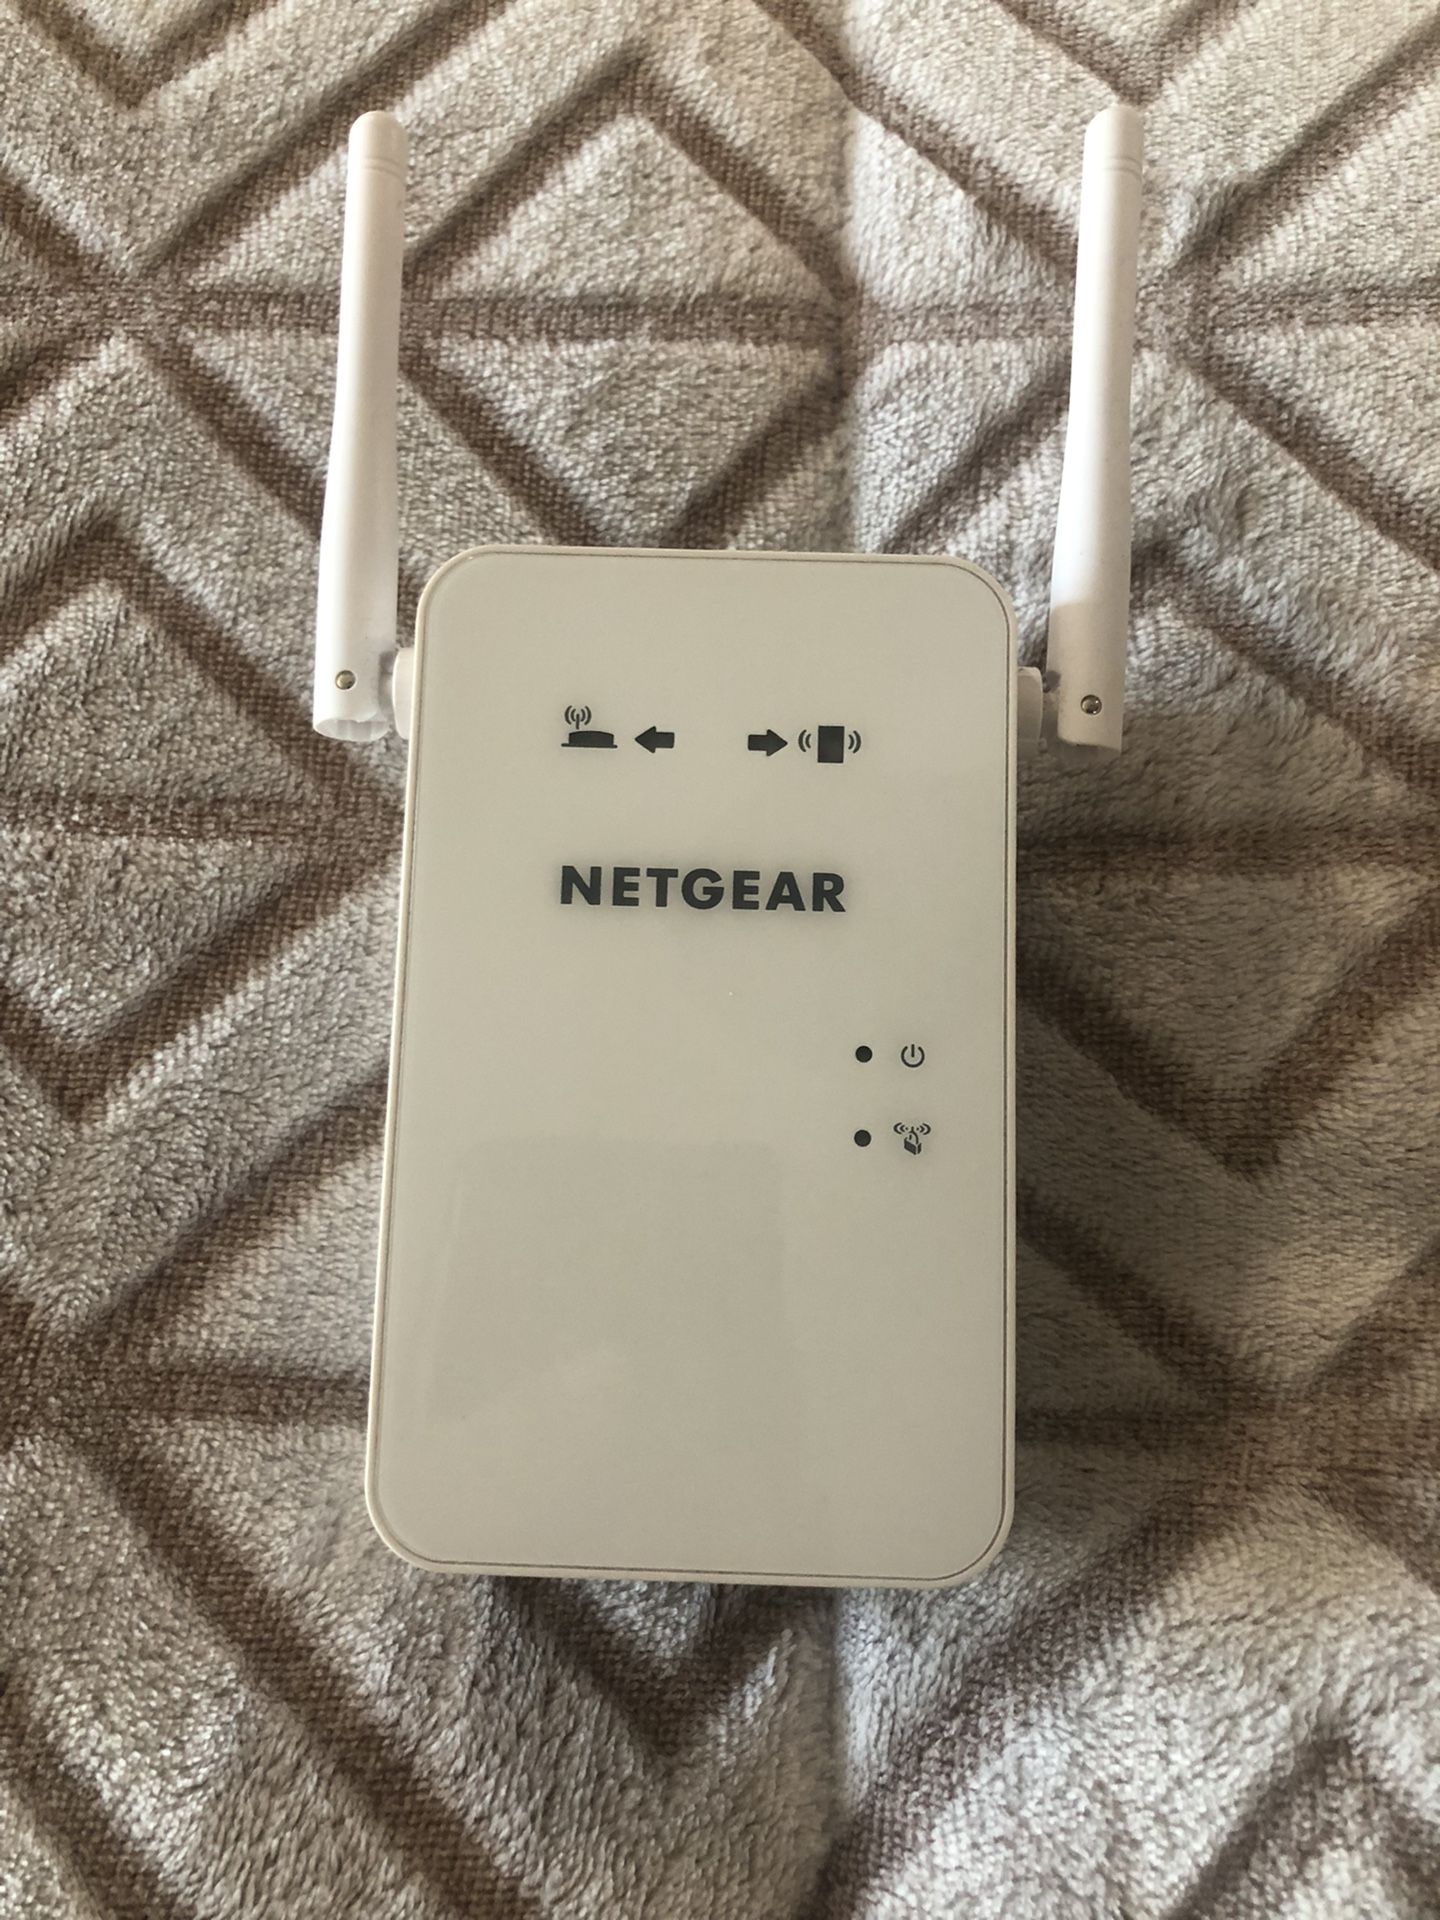 N300 WI-FI speed: Provides up to 300 Mbps performance Universal compatibility: works with any wireless router, gateway, or cable modem with wifi. Syst